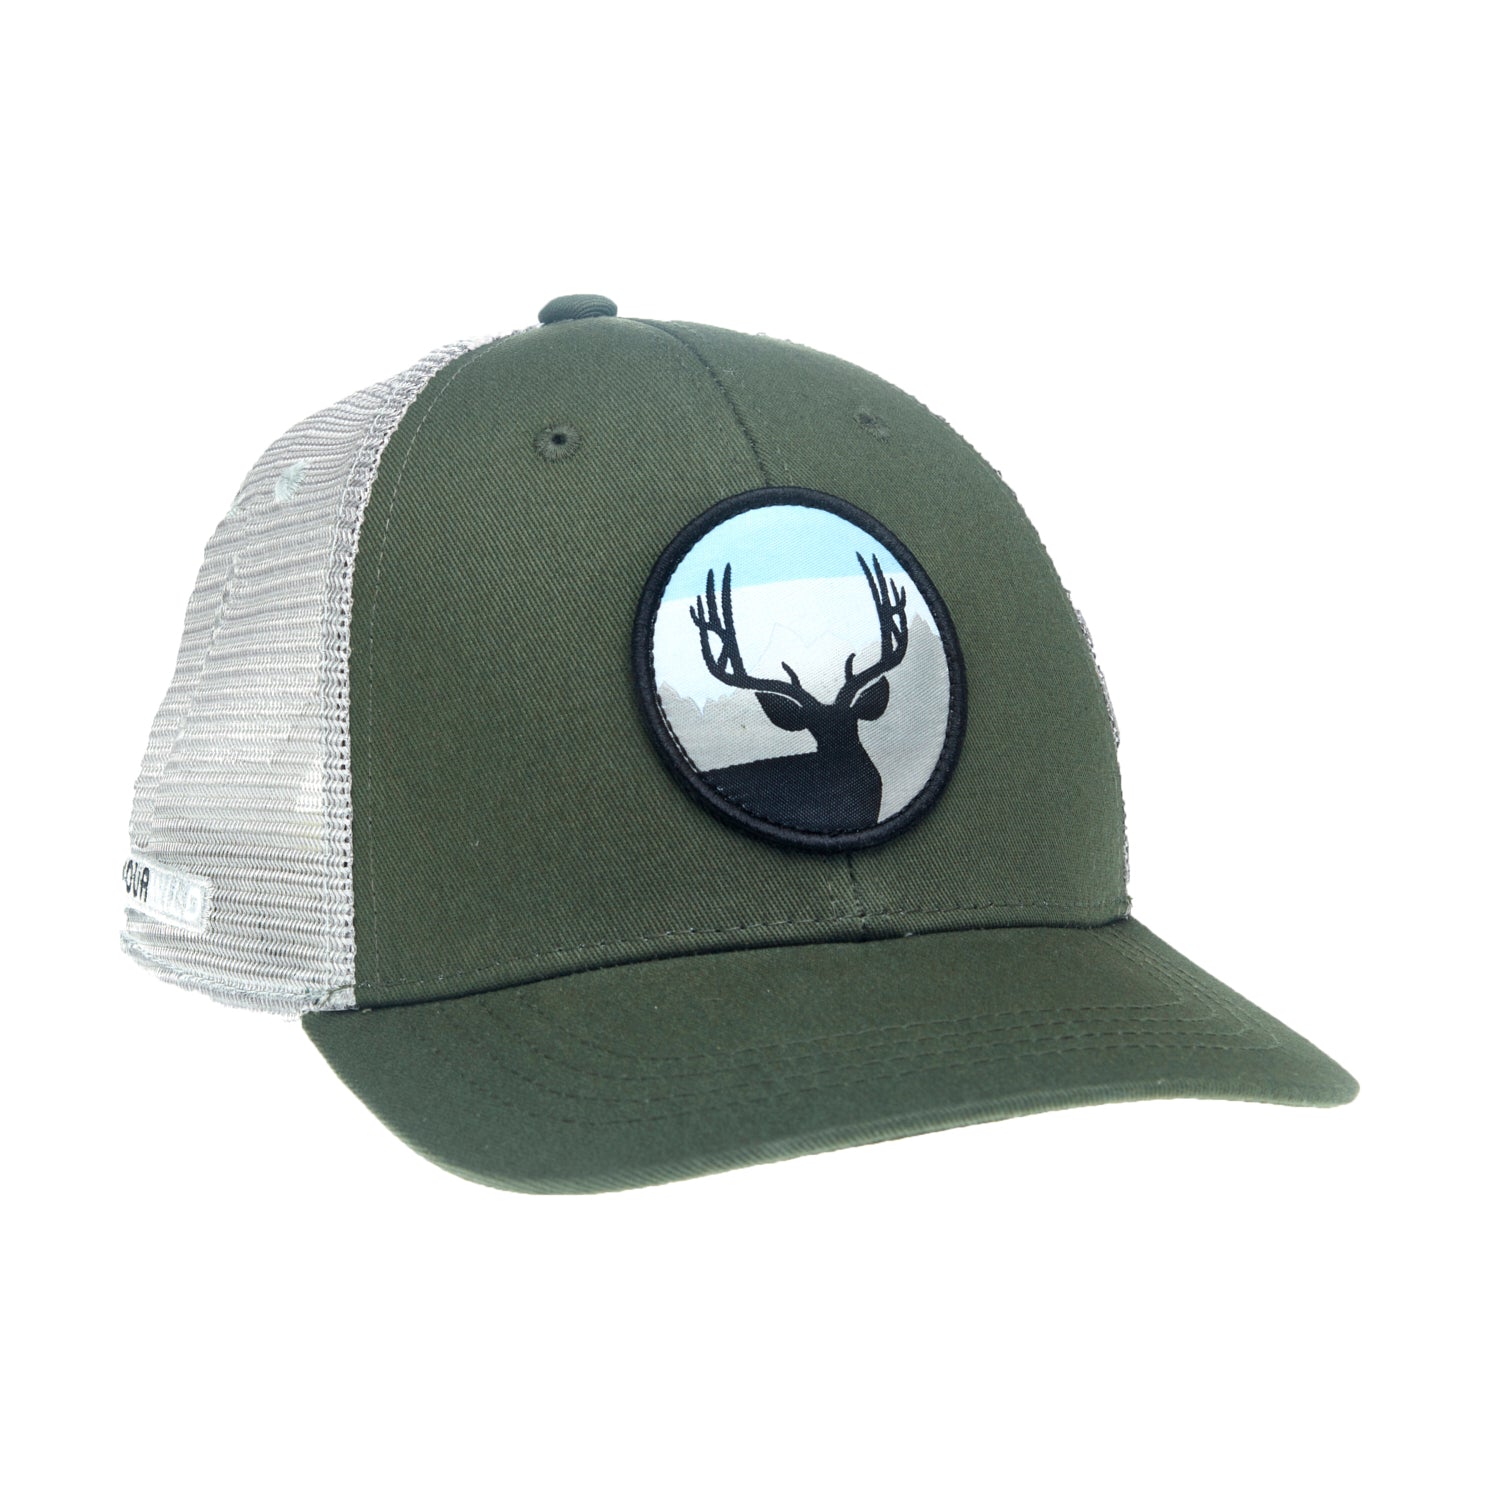 Green hat with gray mesh back with a cicular patch showing the silhouette of a mule deer